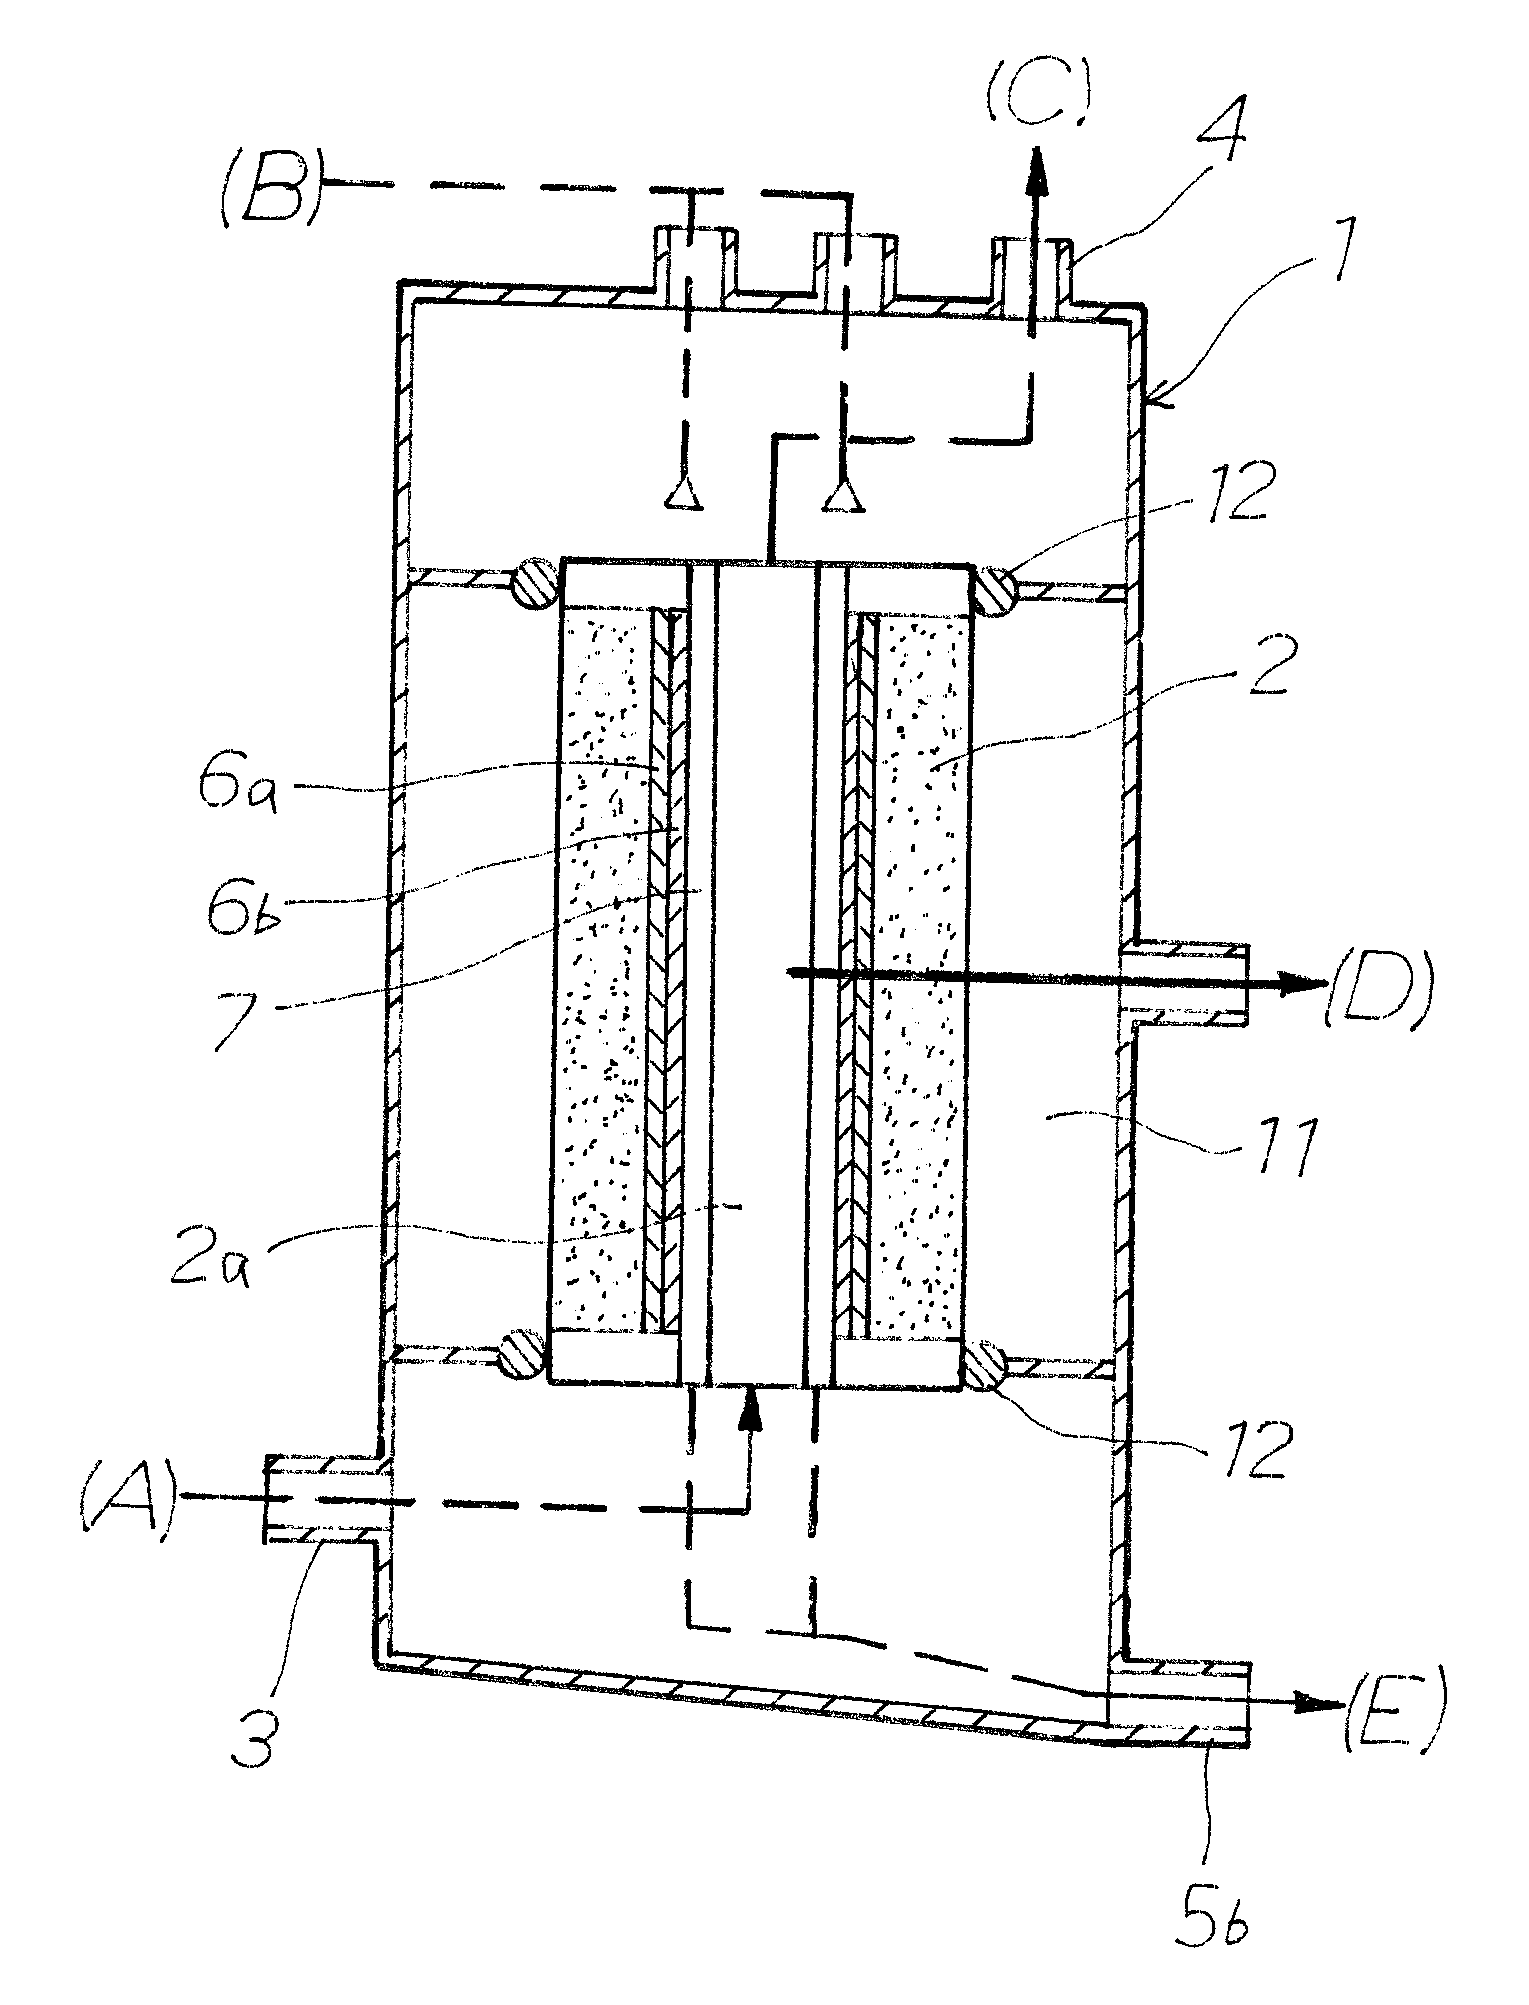 Gas collection method and apparatus therefor